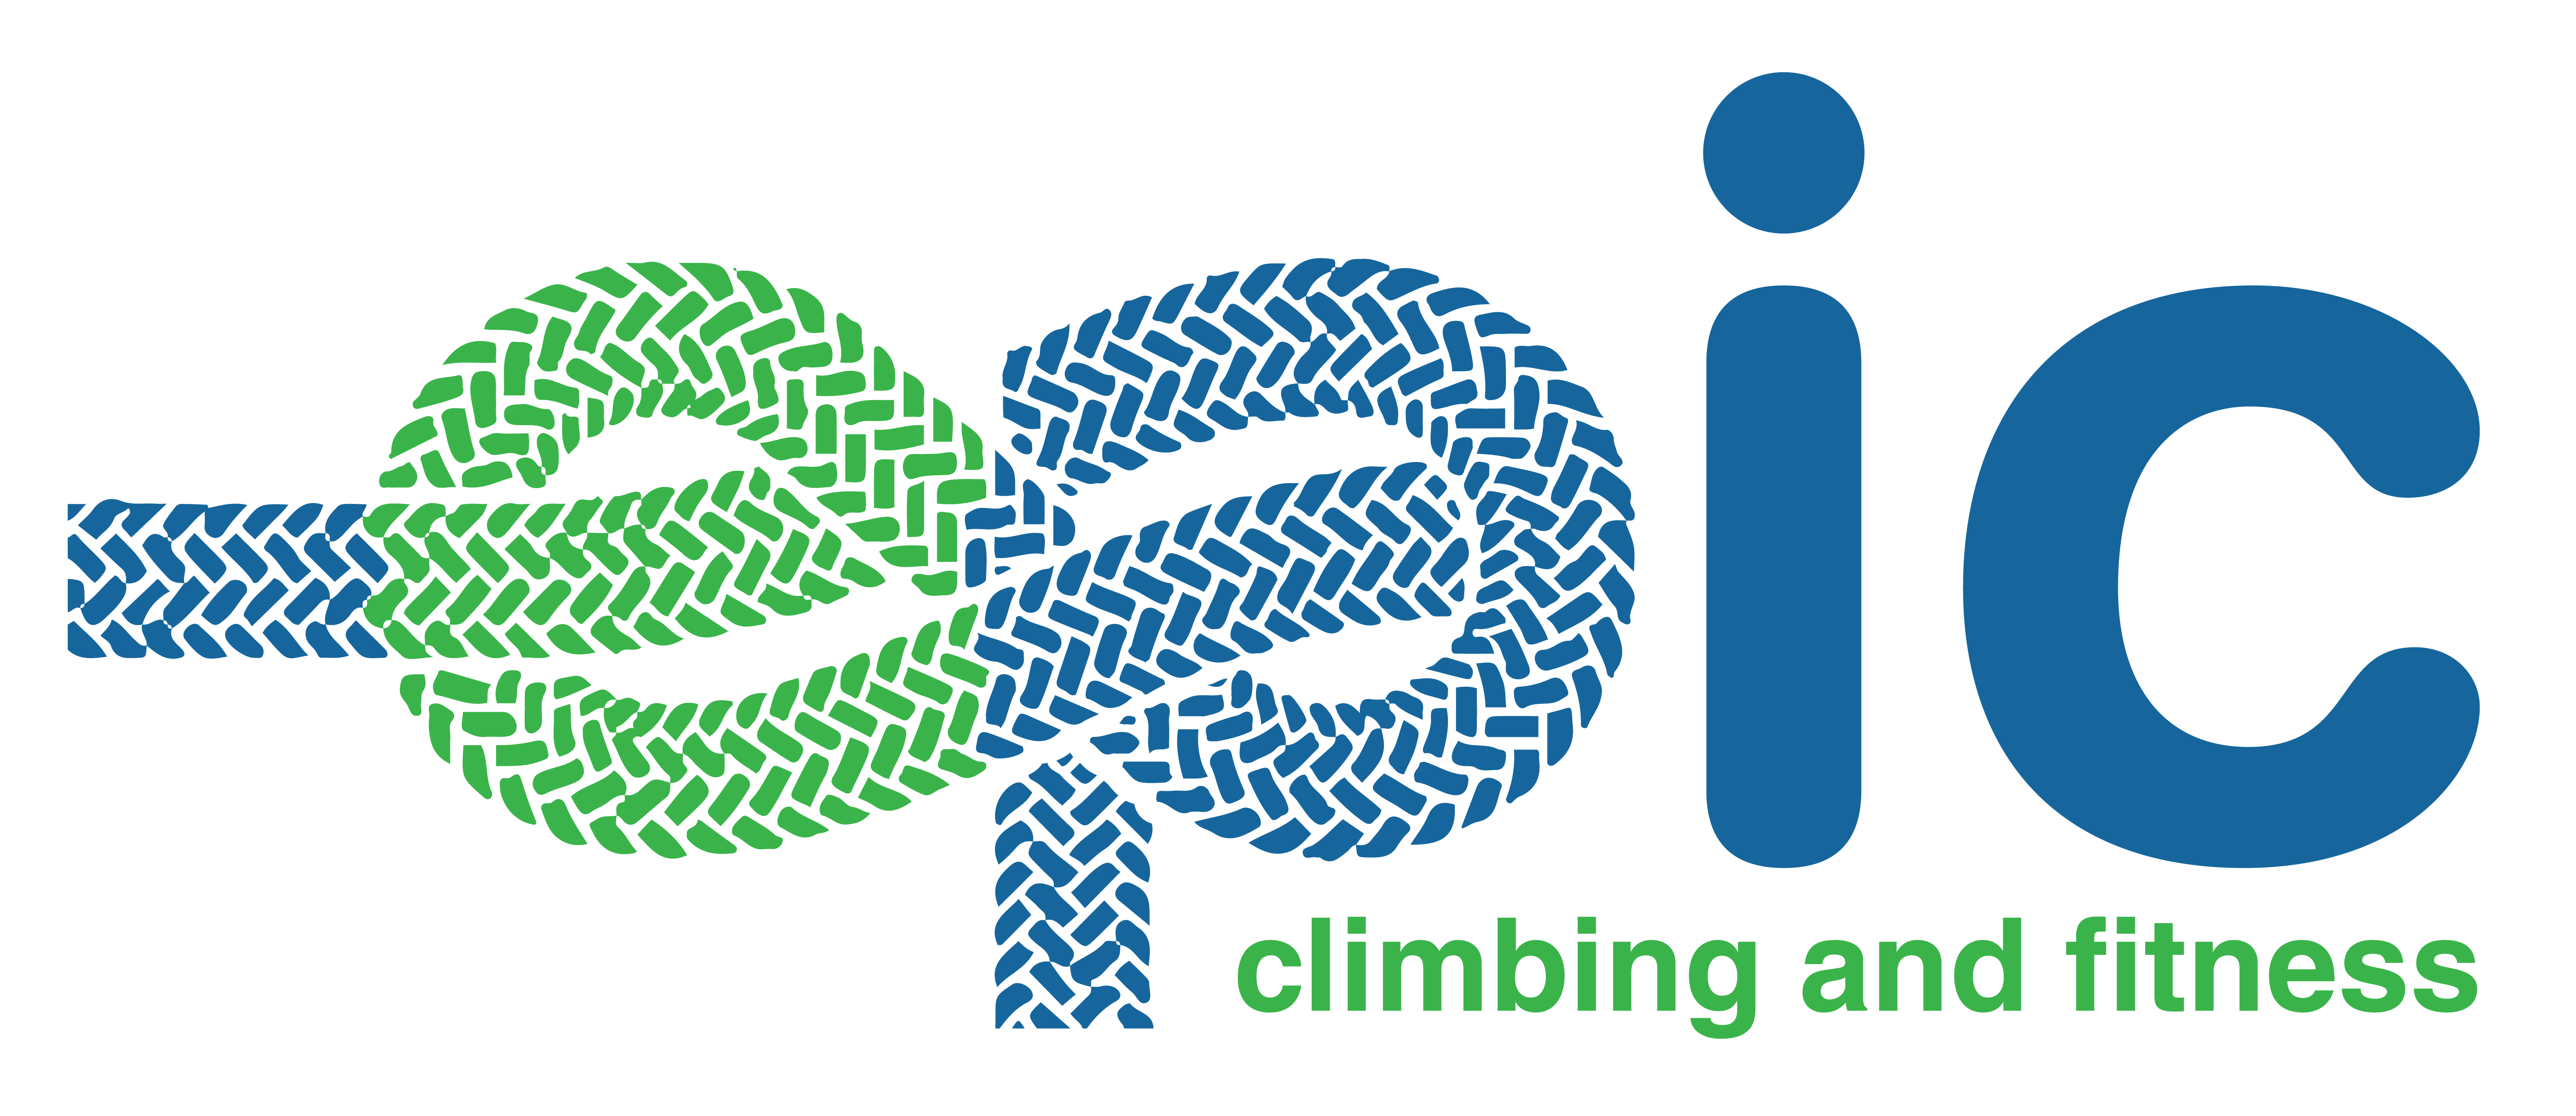 hiking clipart bouldering